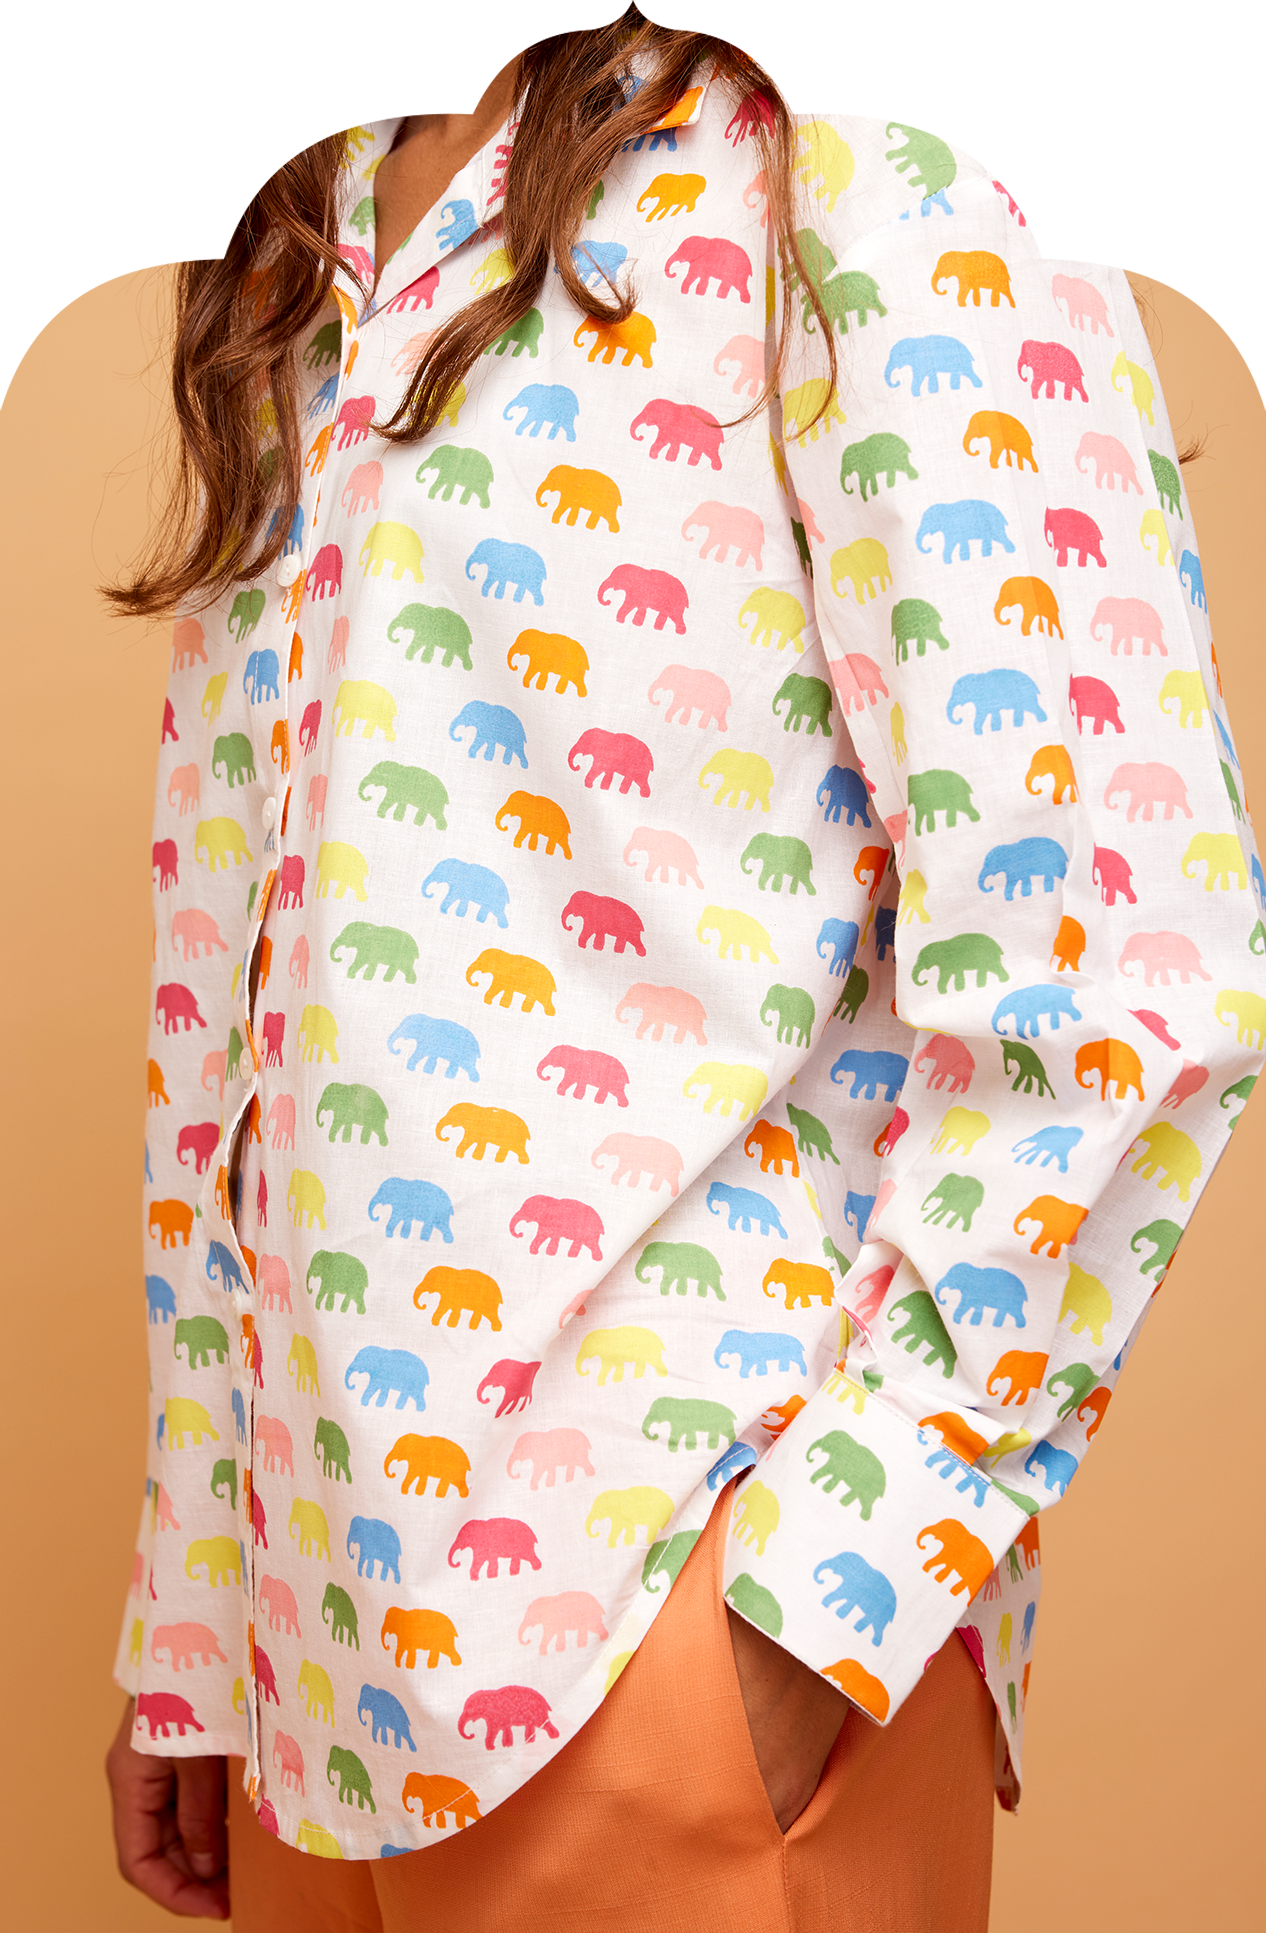 Women's White Shirt with Marching Elephant Print